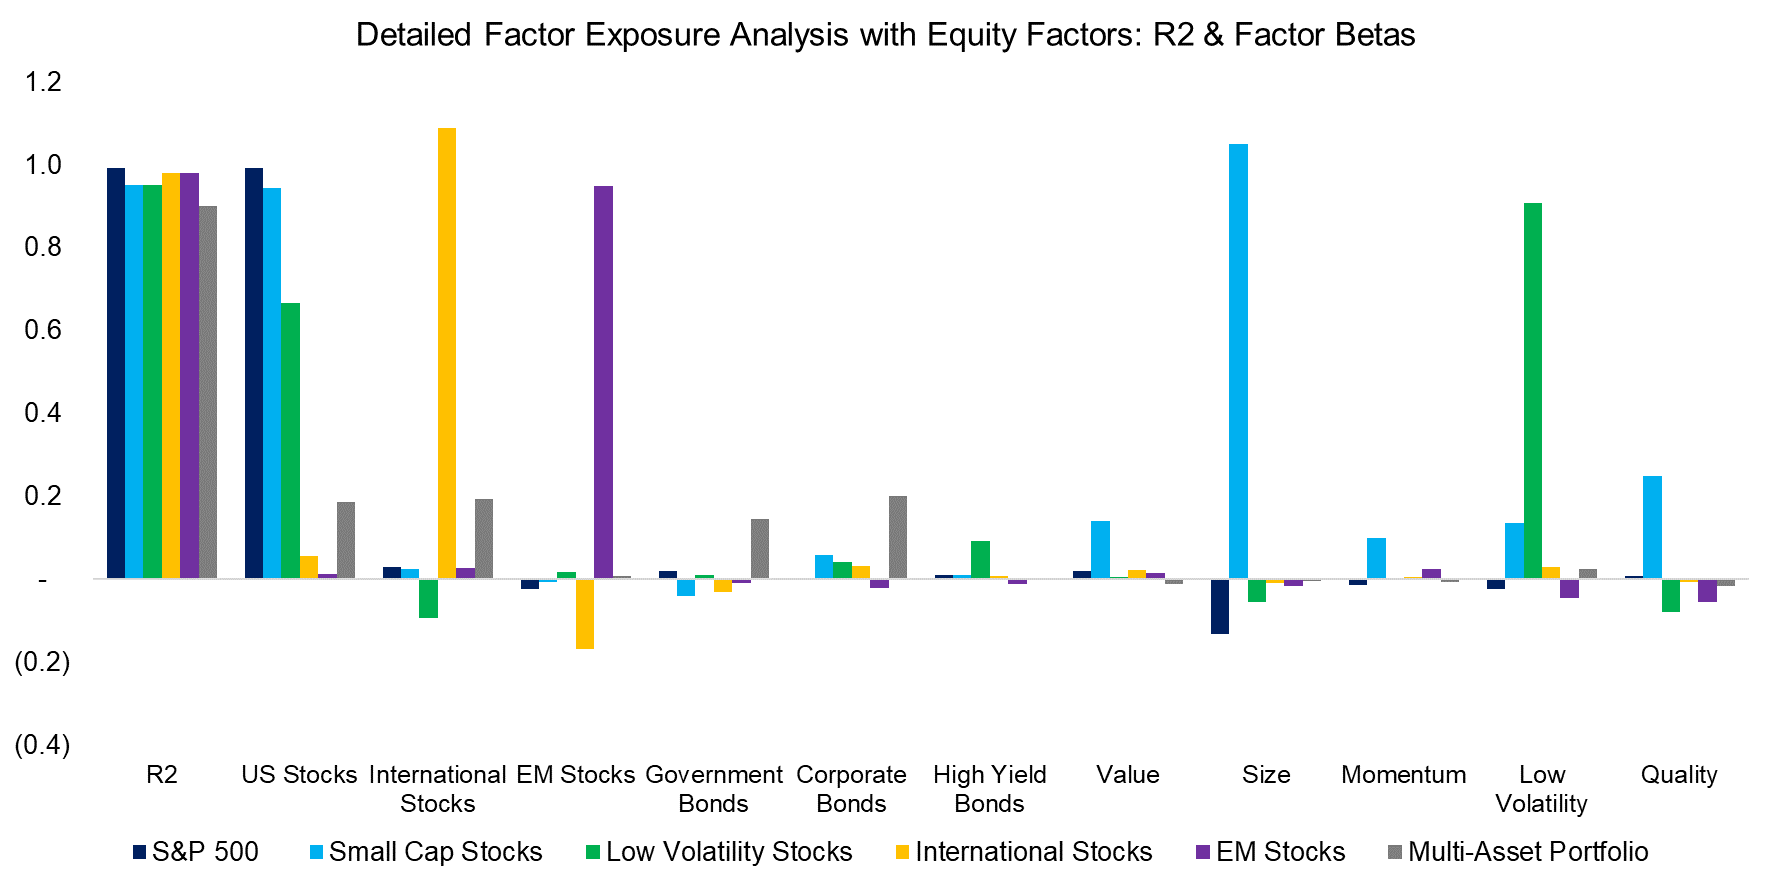 Detailed Factor Exposure Analysis with Equity Factors R2 & Factor Betas